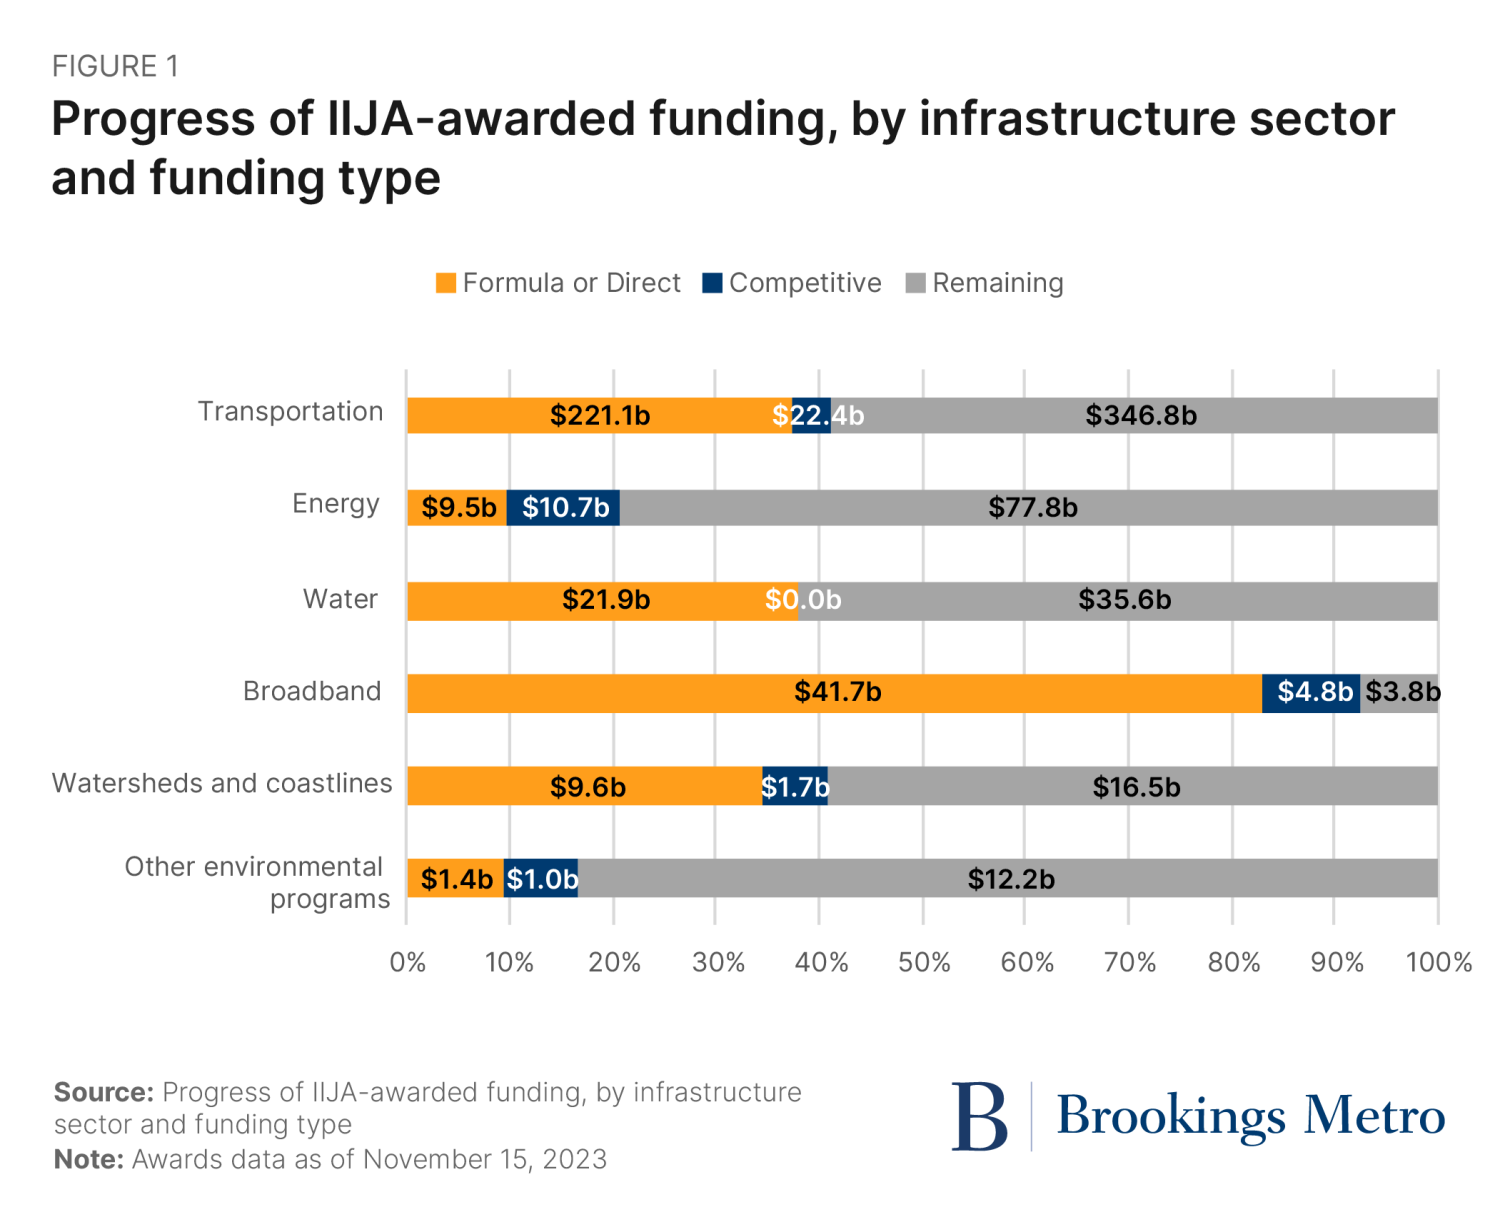 Figure 1. Progress of IIJA-awarded funding, by infrastructure sector and funding type